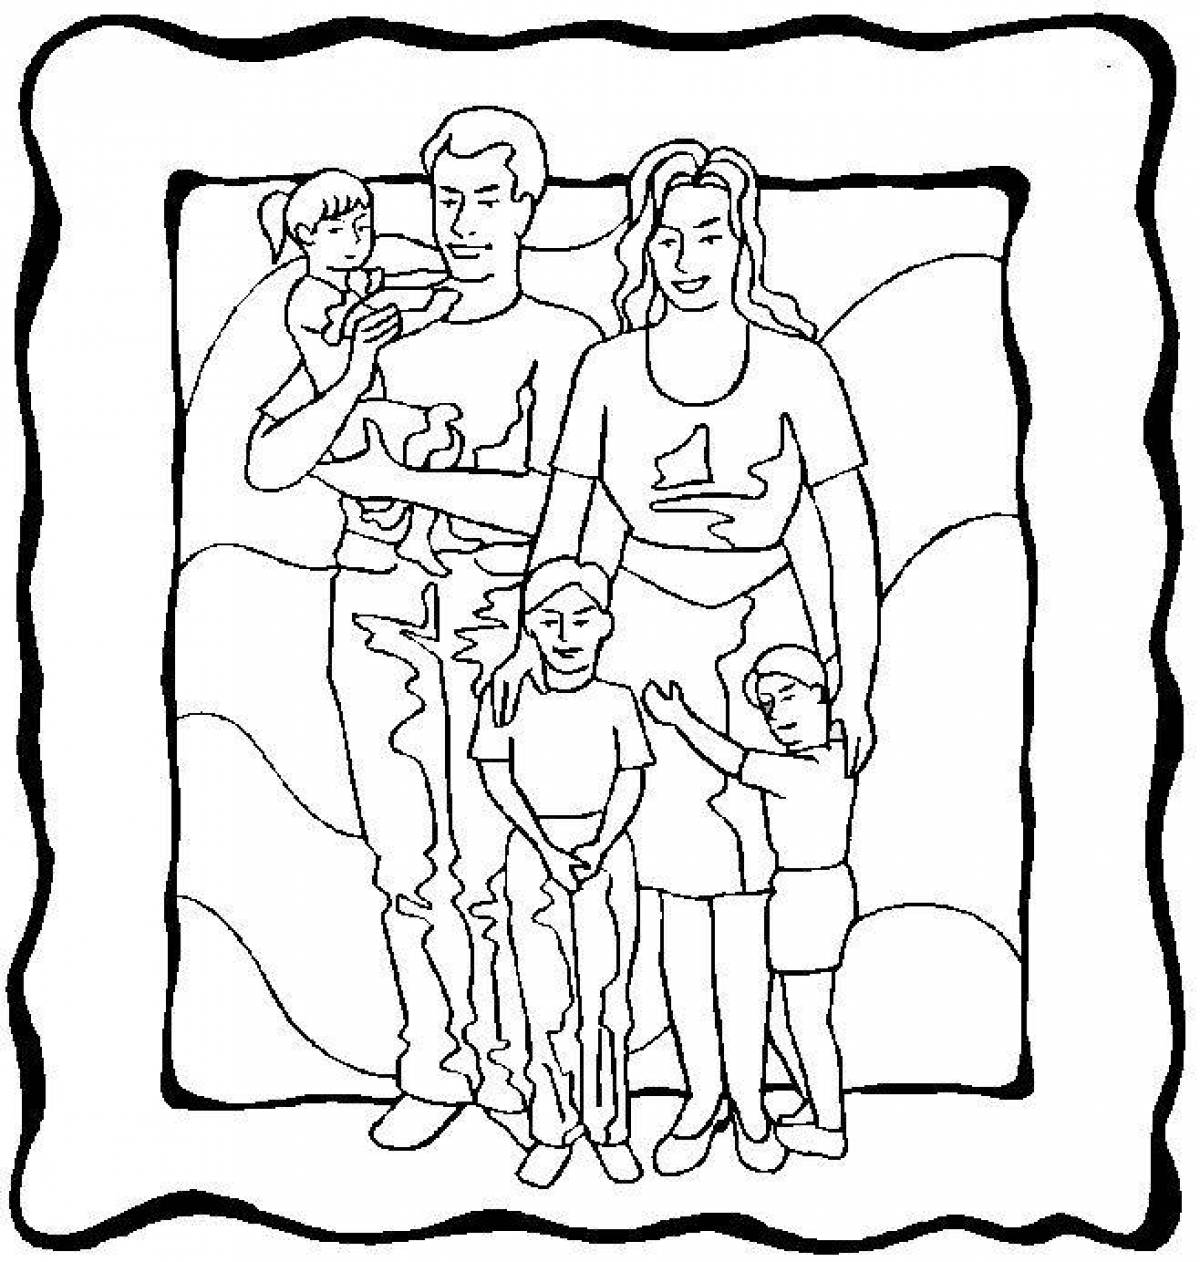 Fun family coloring book for 5-6 year olds